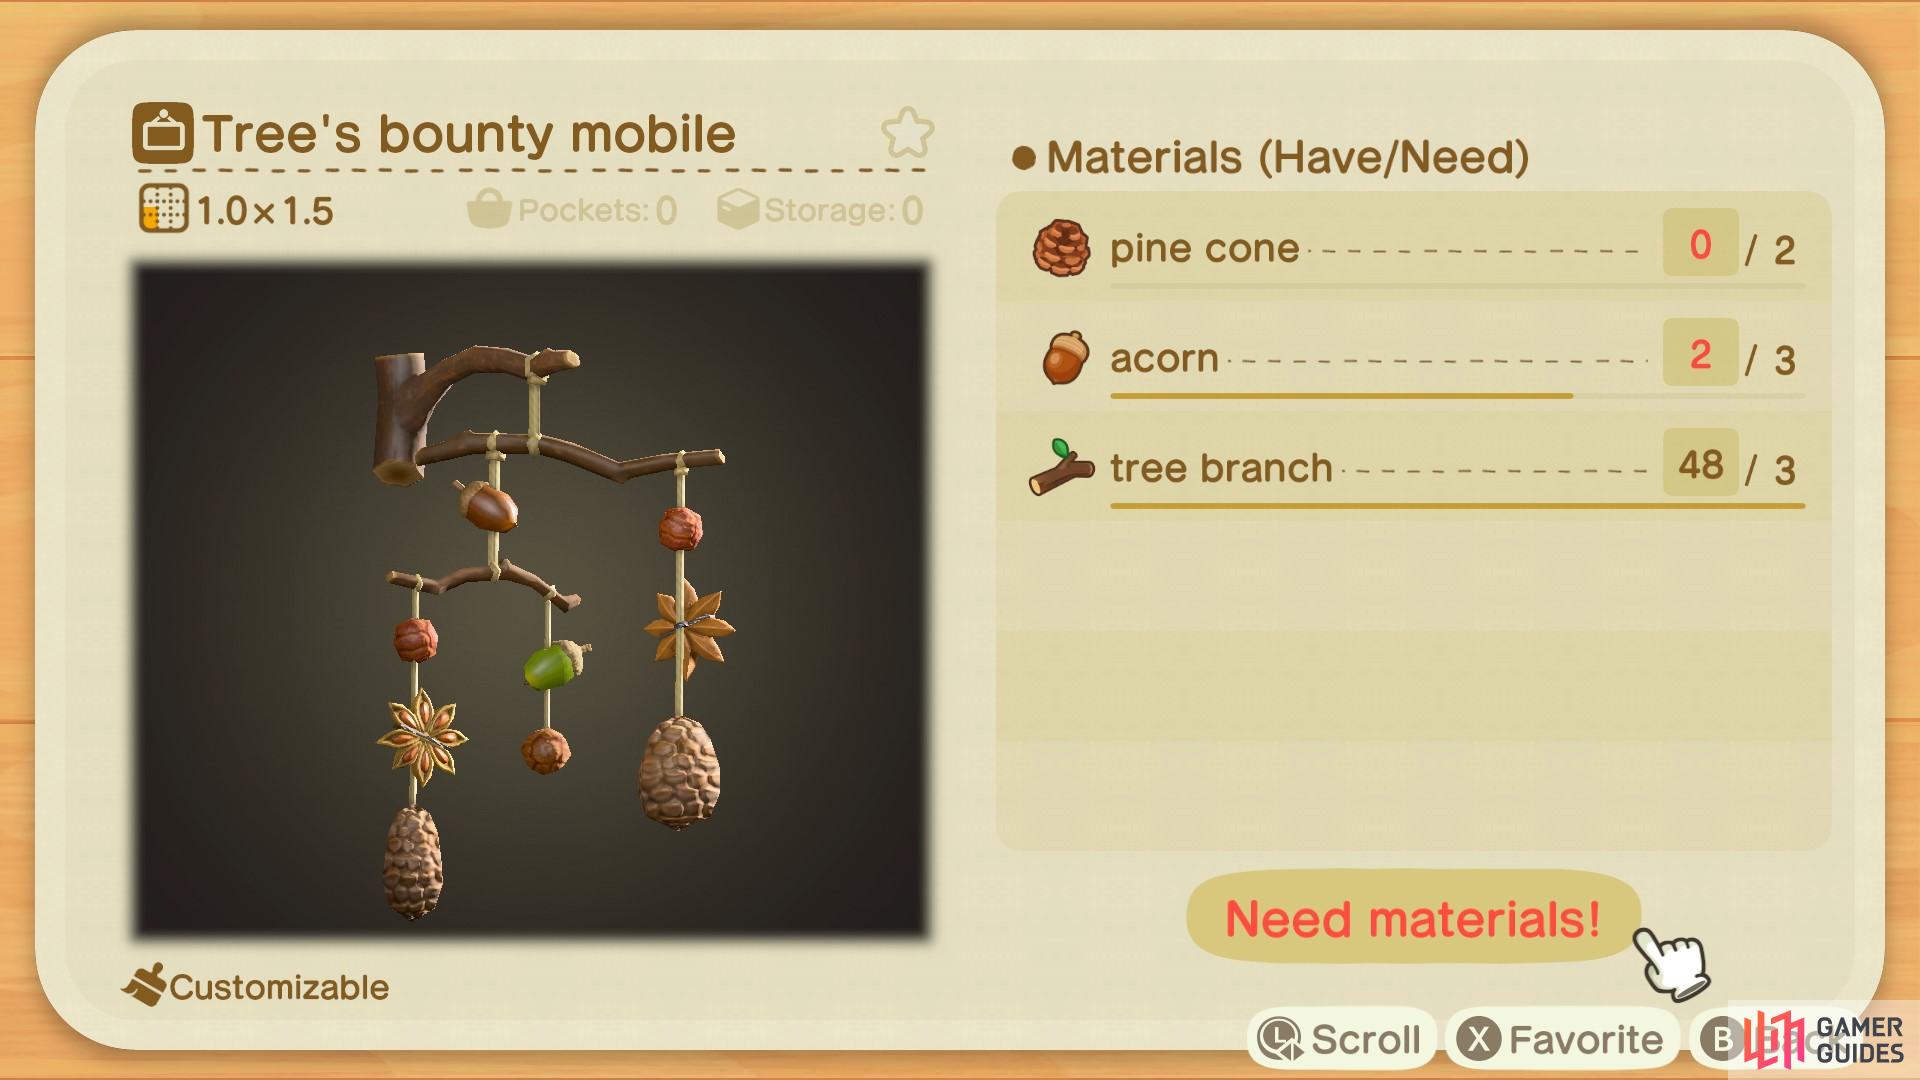 The Tree's Bounty Mobile can be hung up on walls in your home. 